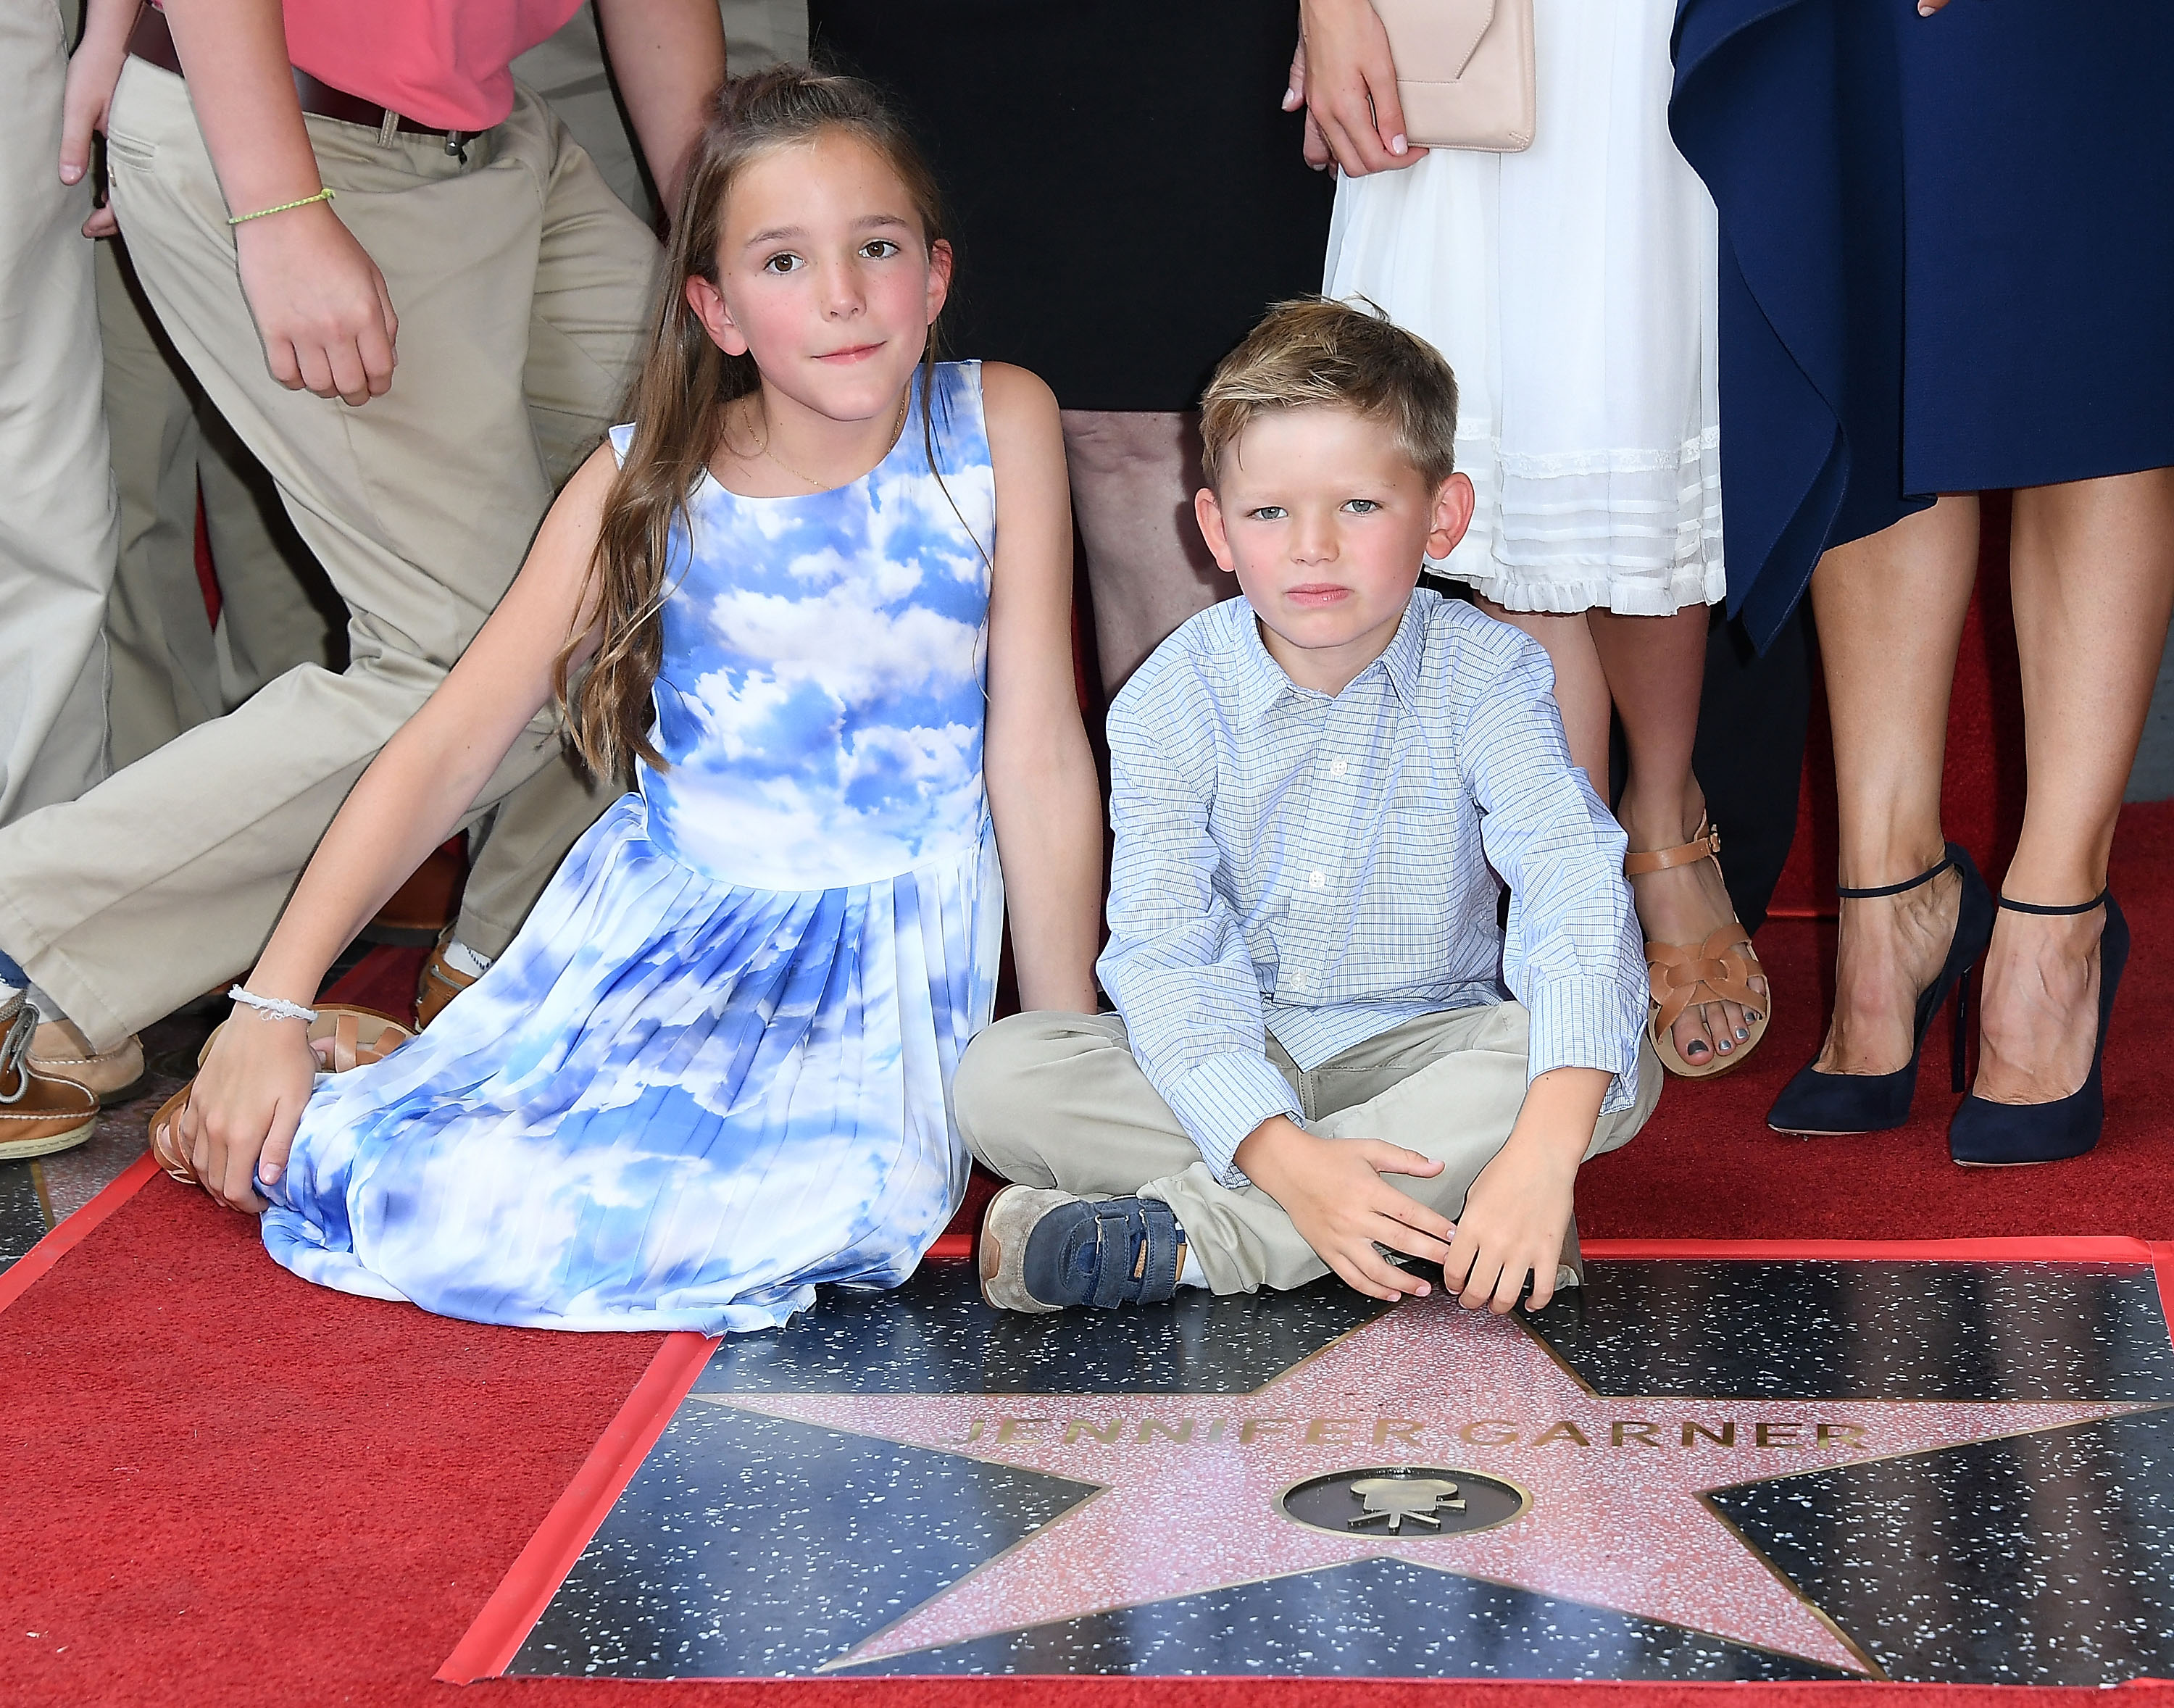 Seraphina Affleck and Samuel Garner Affleck during a ceremony honoring Jennifer Garner with a star on the Hollywood Walk of Fame on August 20, 2018 in Hollywood, California. | Source: Getty Images